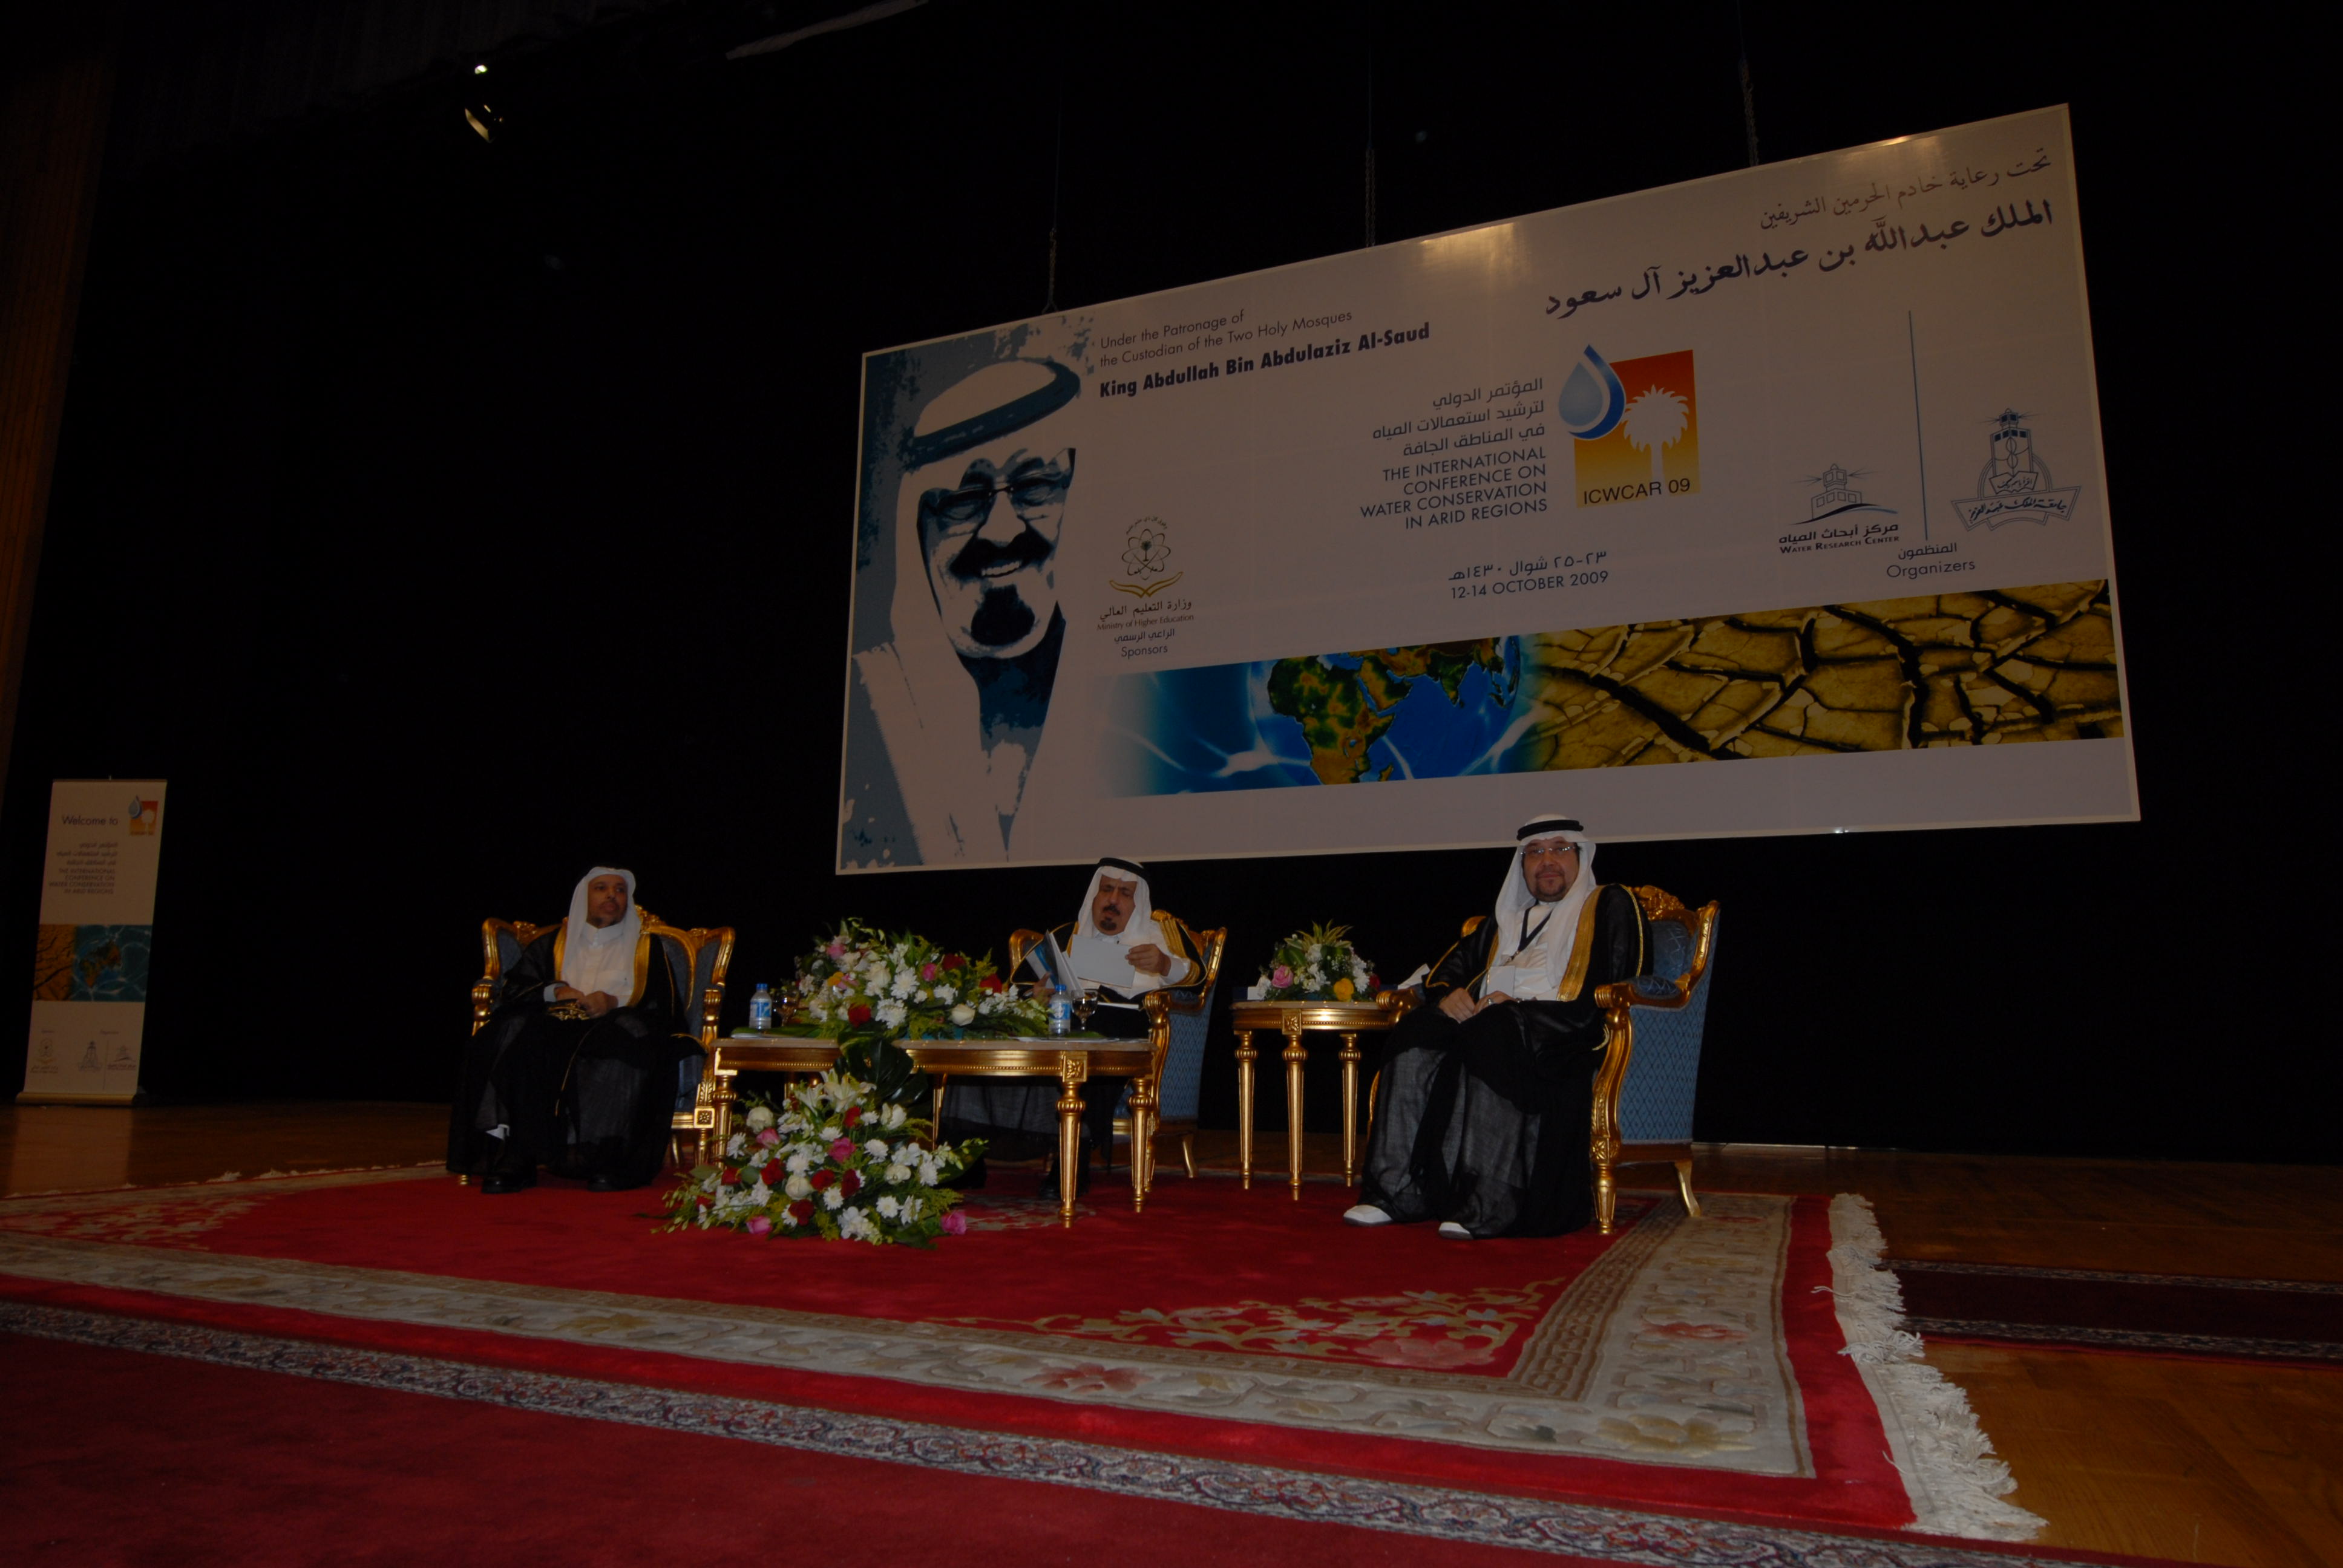 The International Conference on Water Conservation in Arid Regions